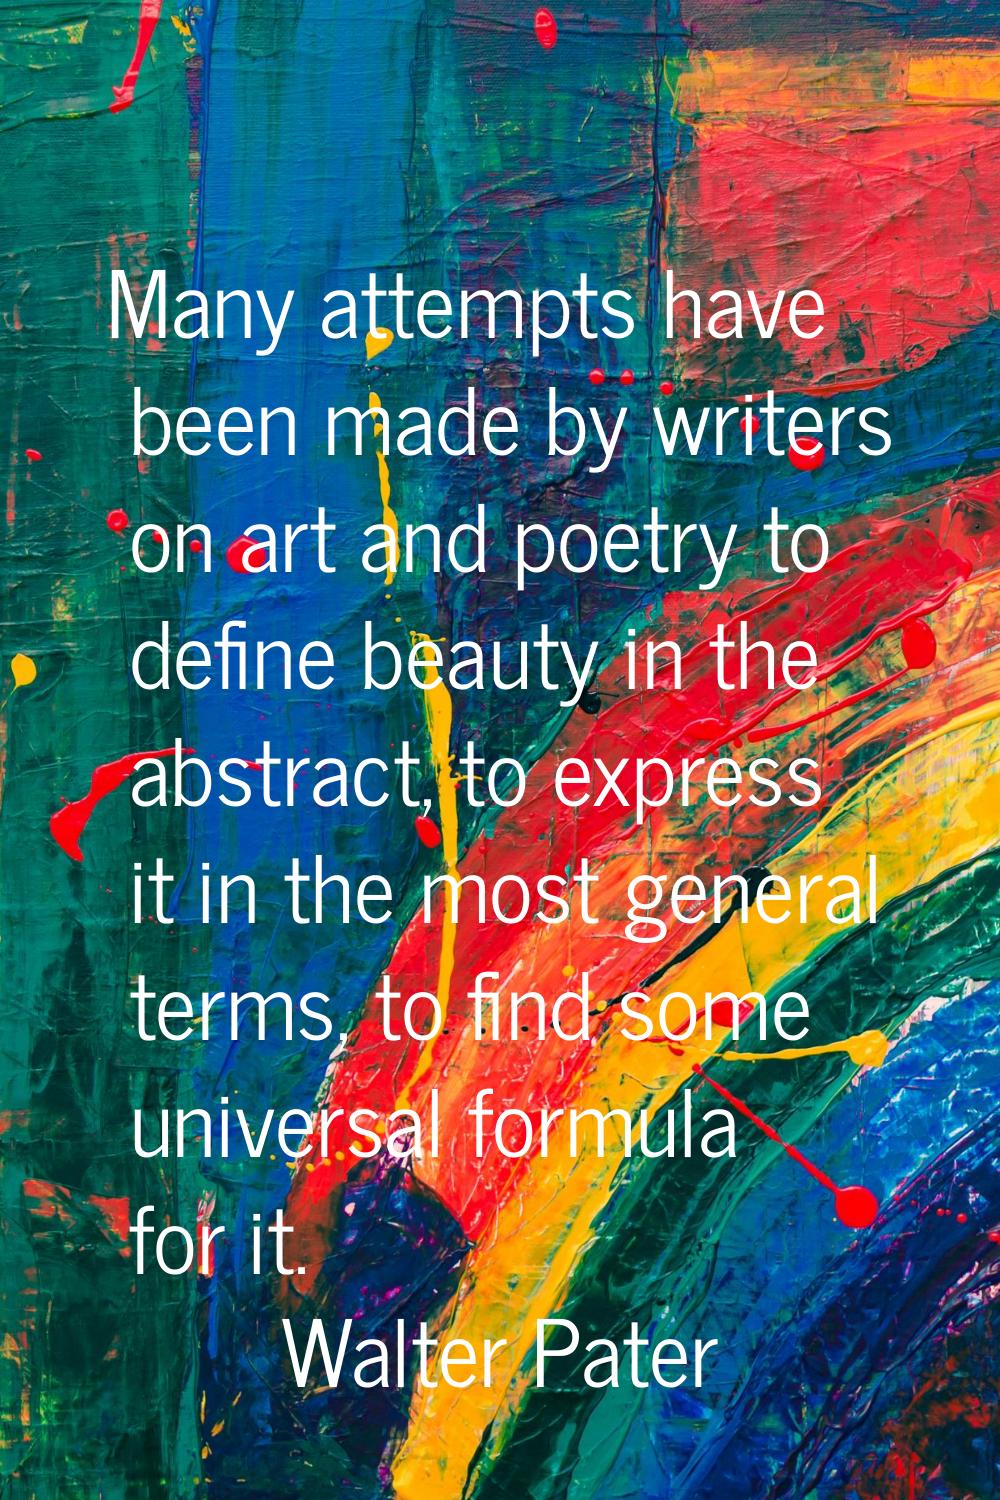 Many attempts have been made by writers on art and poetry to define beauty in the abstract, to expr